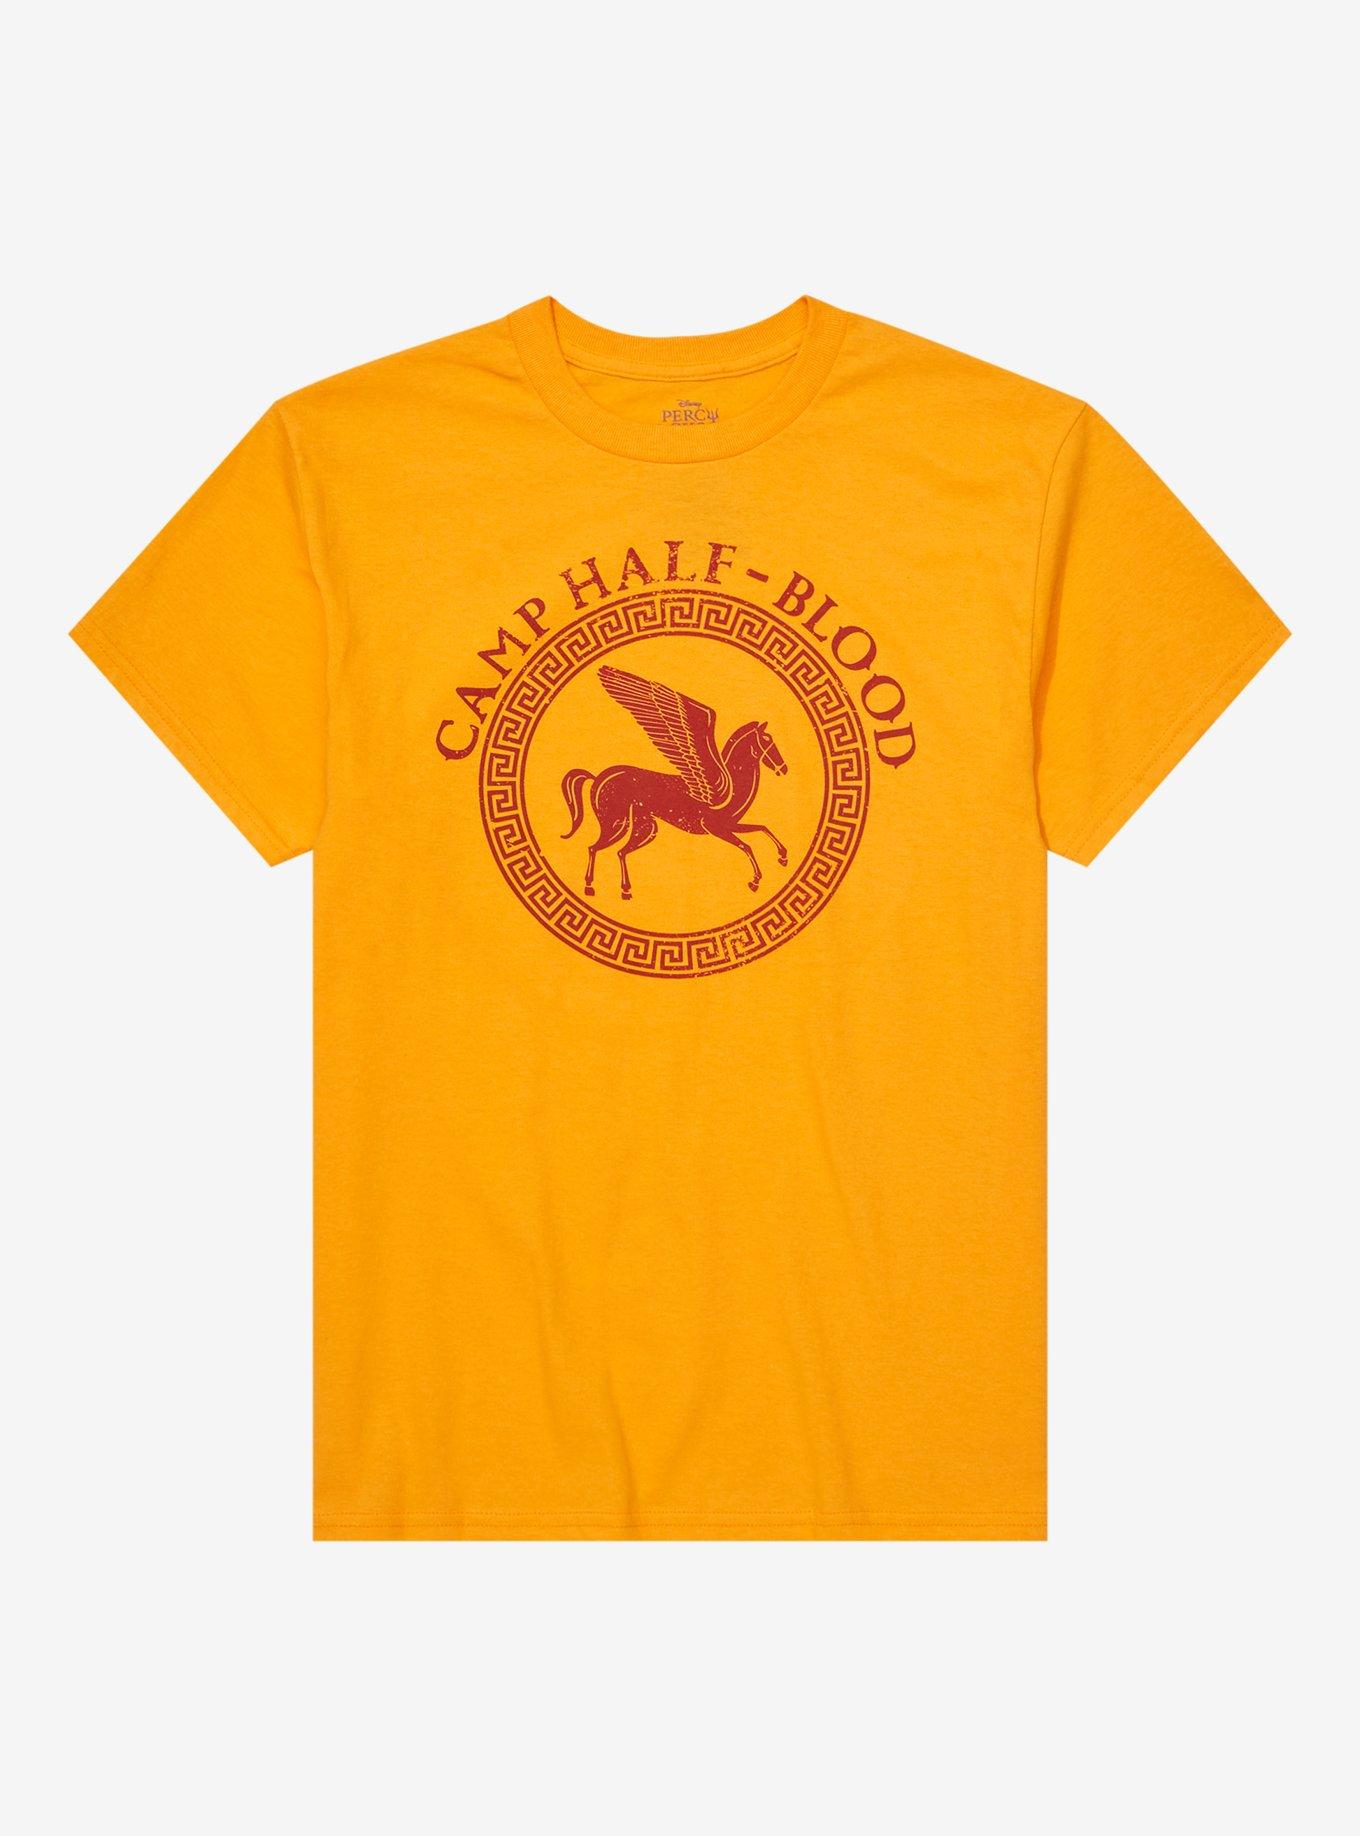 Disney Percy Jackson And Olympians | Camp The T-Shirt Hot Half-Blood Topic